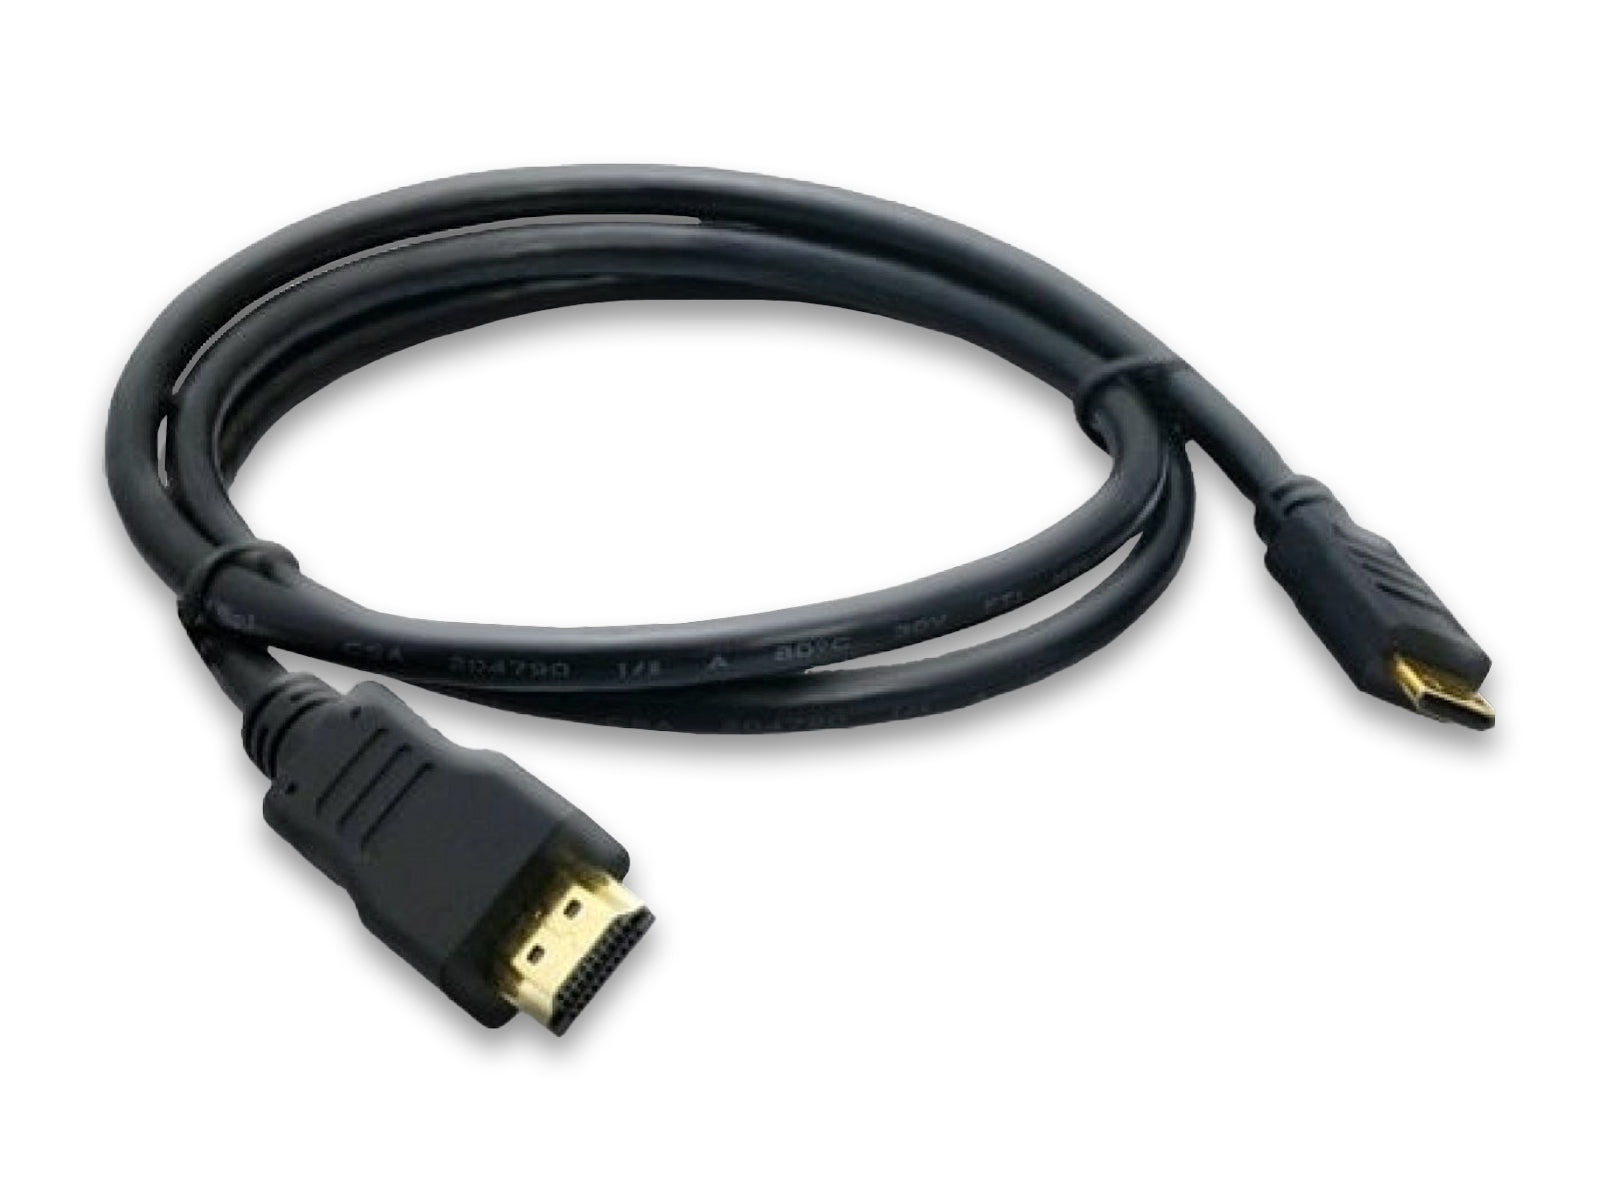 Image-of-the-rolled-up-black-hdmi-cable-on-the-white-background